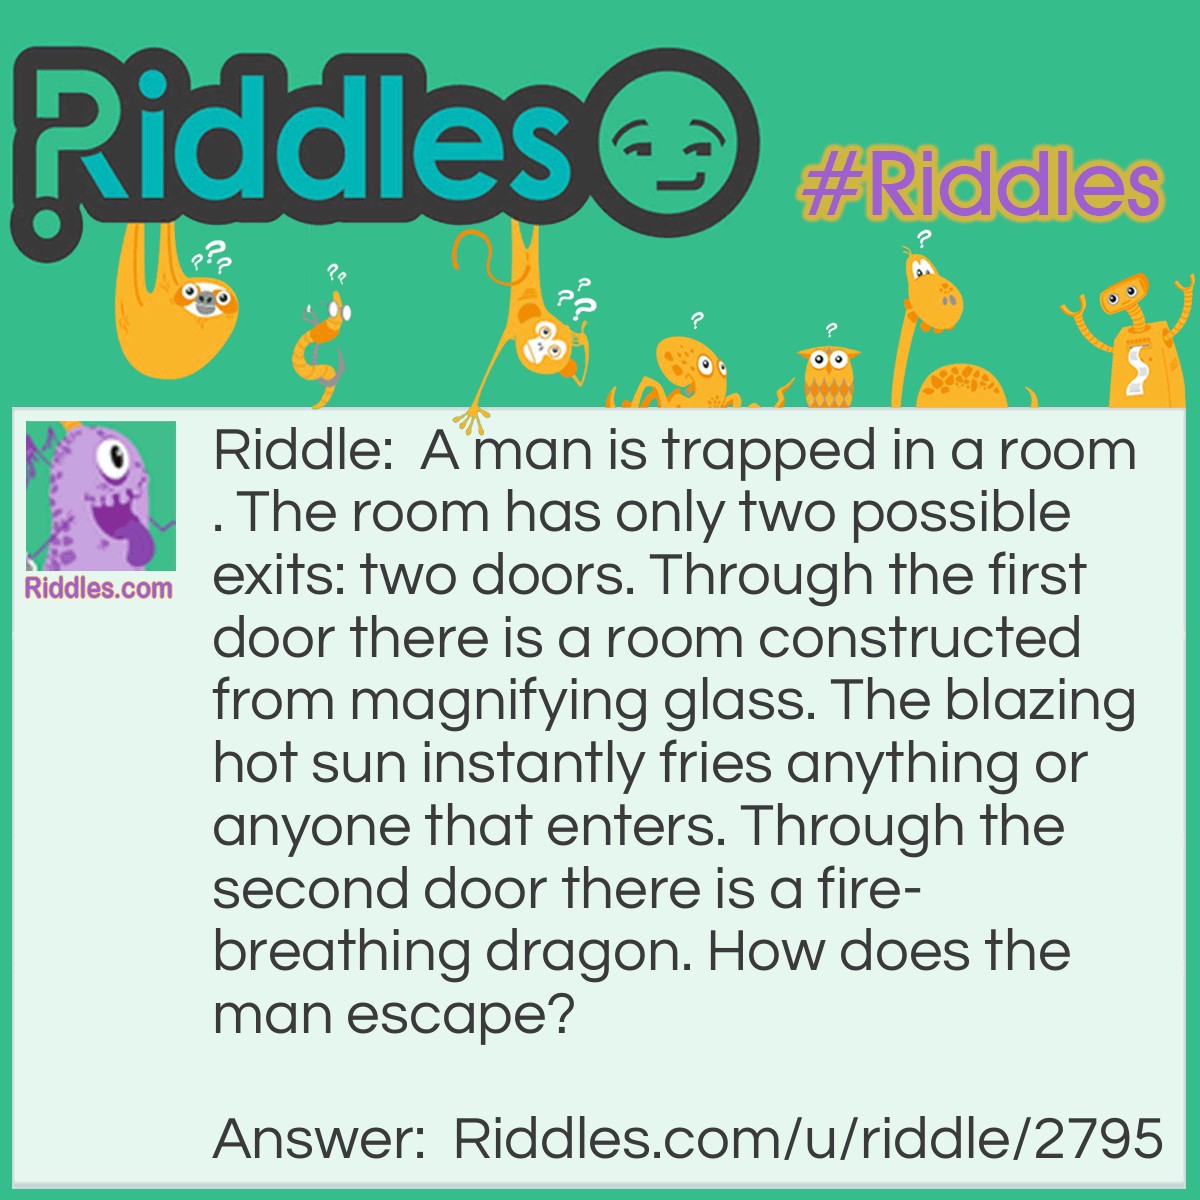 Riddle: A man is trapped in a room. The room has only two possible exits: two doors. Through the first door, there is a room constructed from magnifying glass. The blazing hot sun instantly fries anything or anyone that enters. Through the second door, there is a fire-breathing dragon. How does the man escape? Answer: He waits until night time and then goes through the first door.